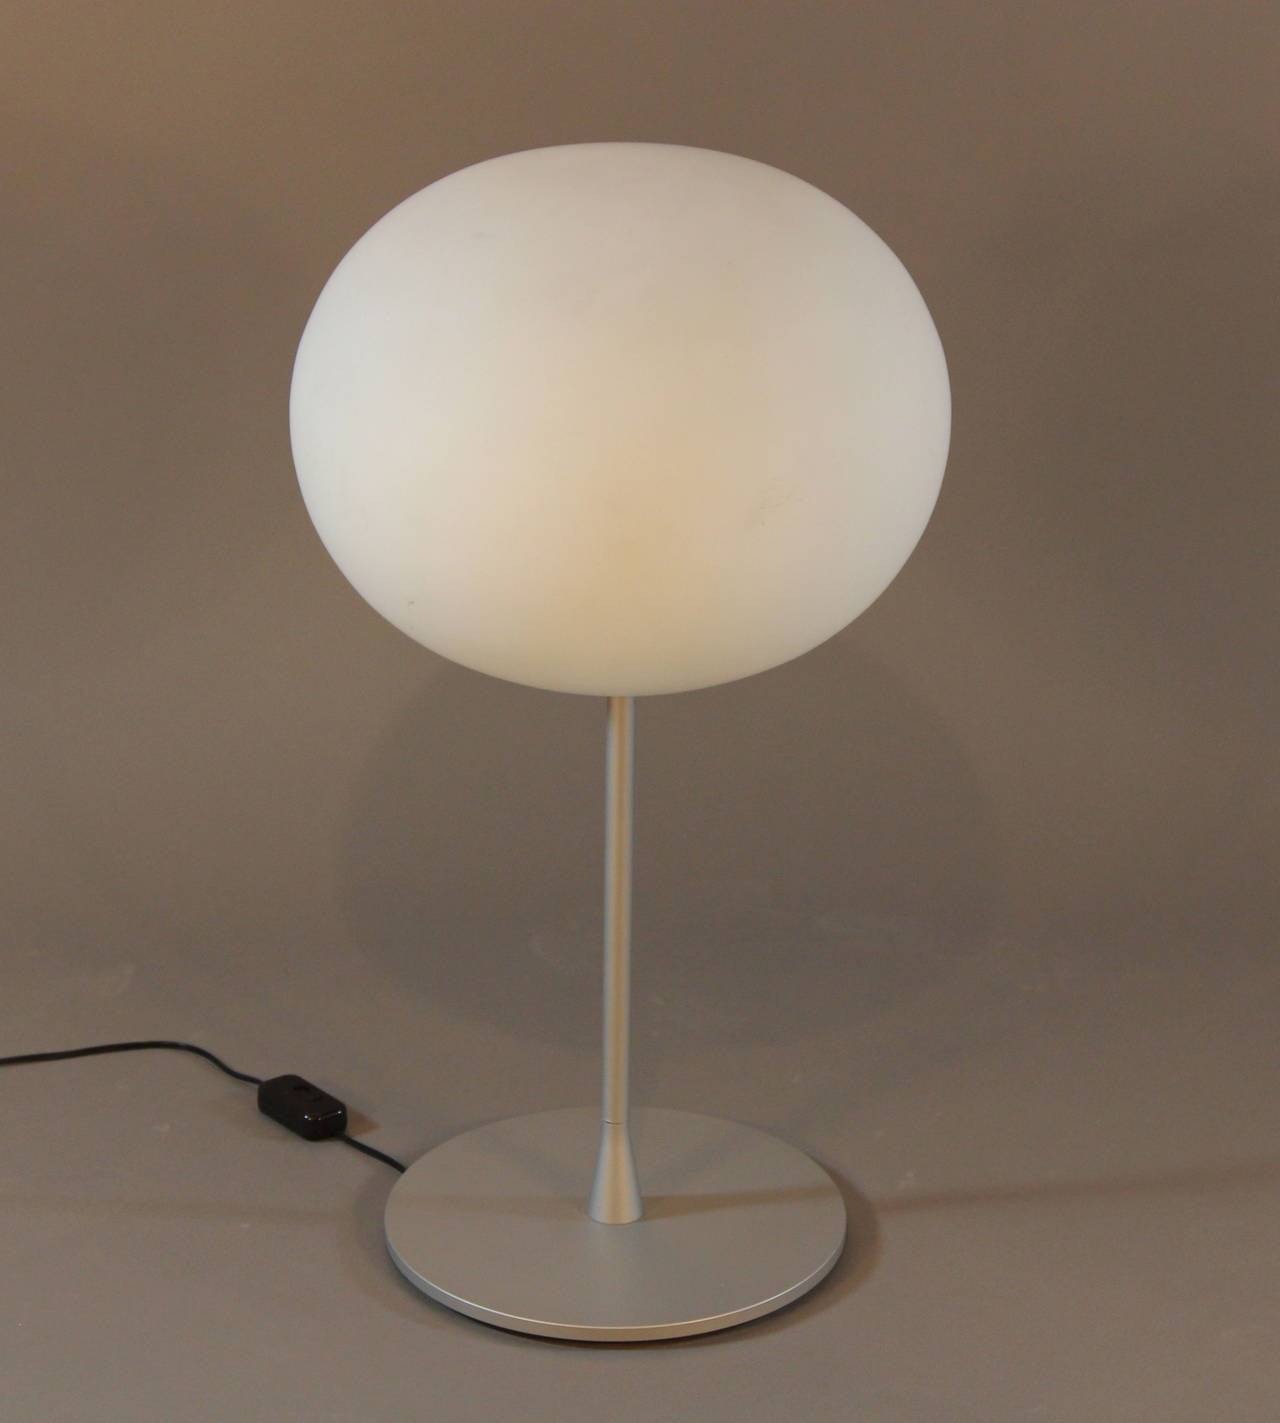 Glo-ball T tabletop lamp by Flos. Designed by Jasper Morrison with dimmer.